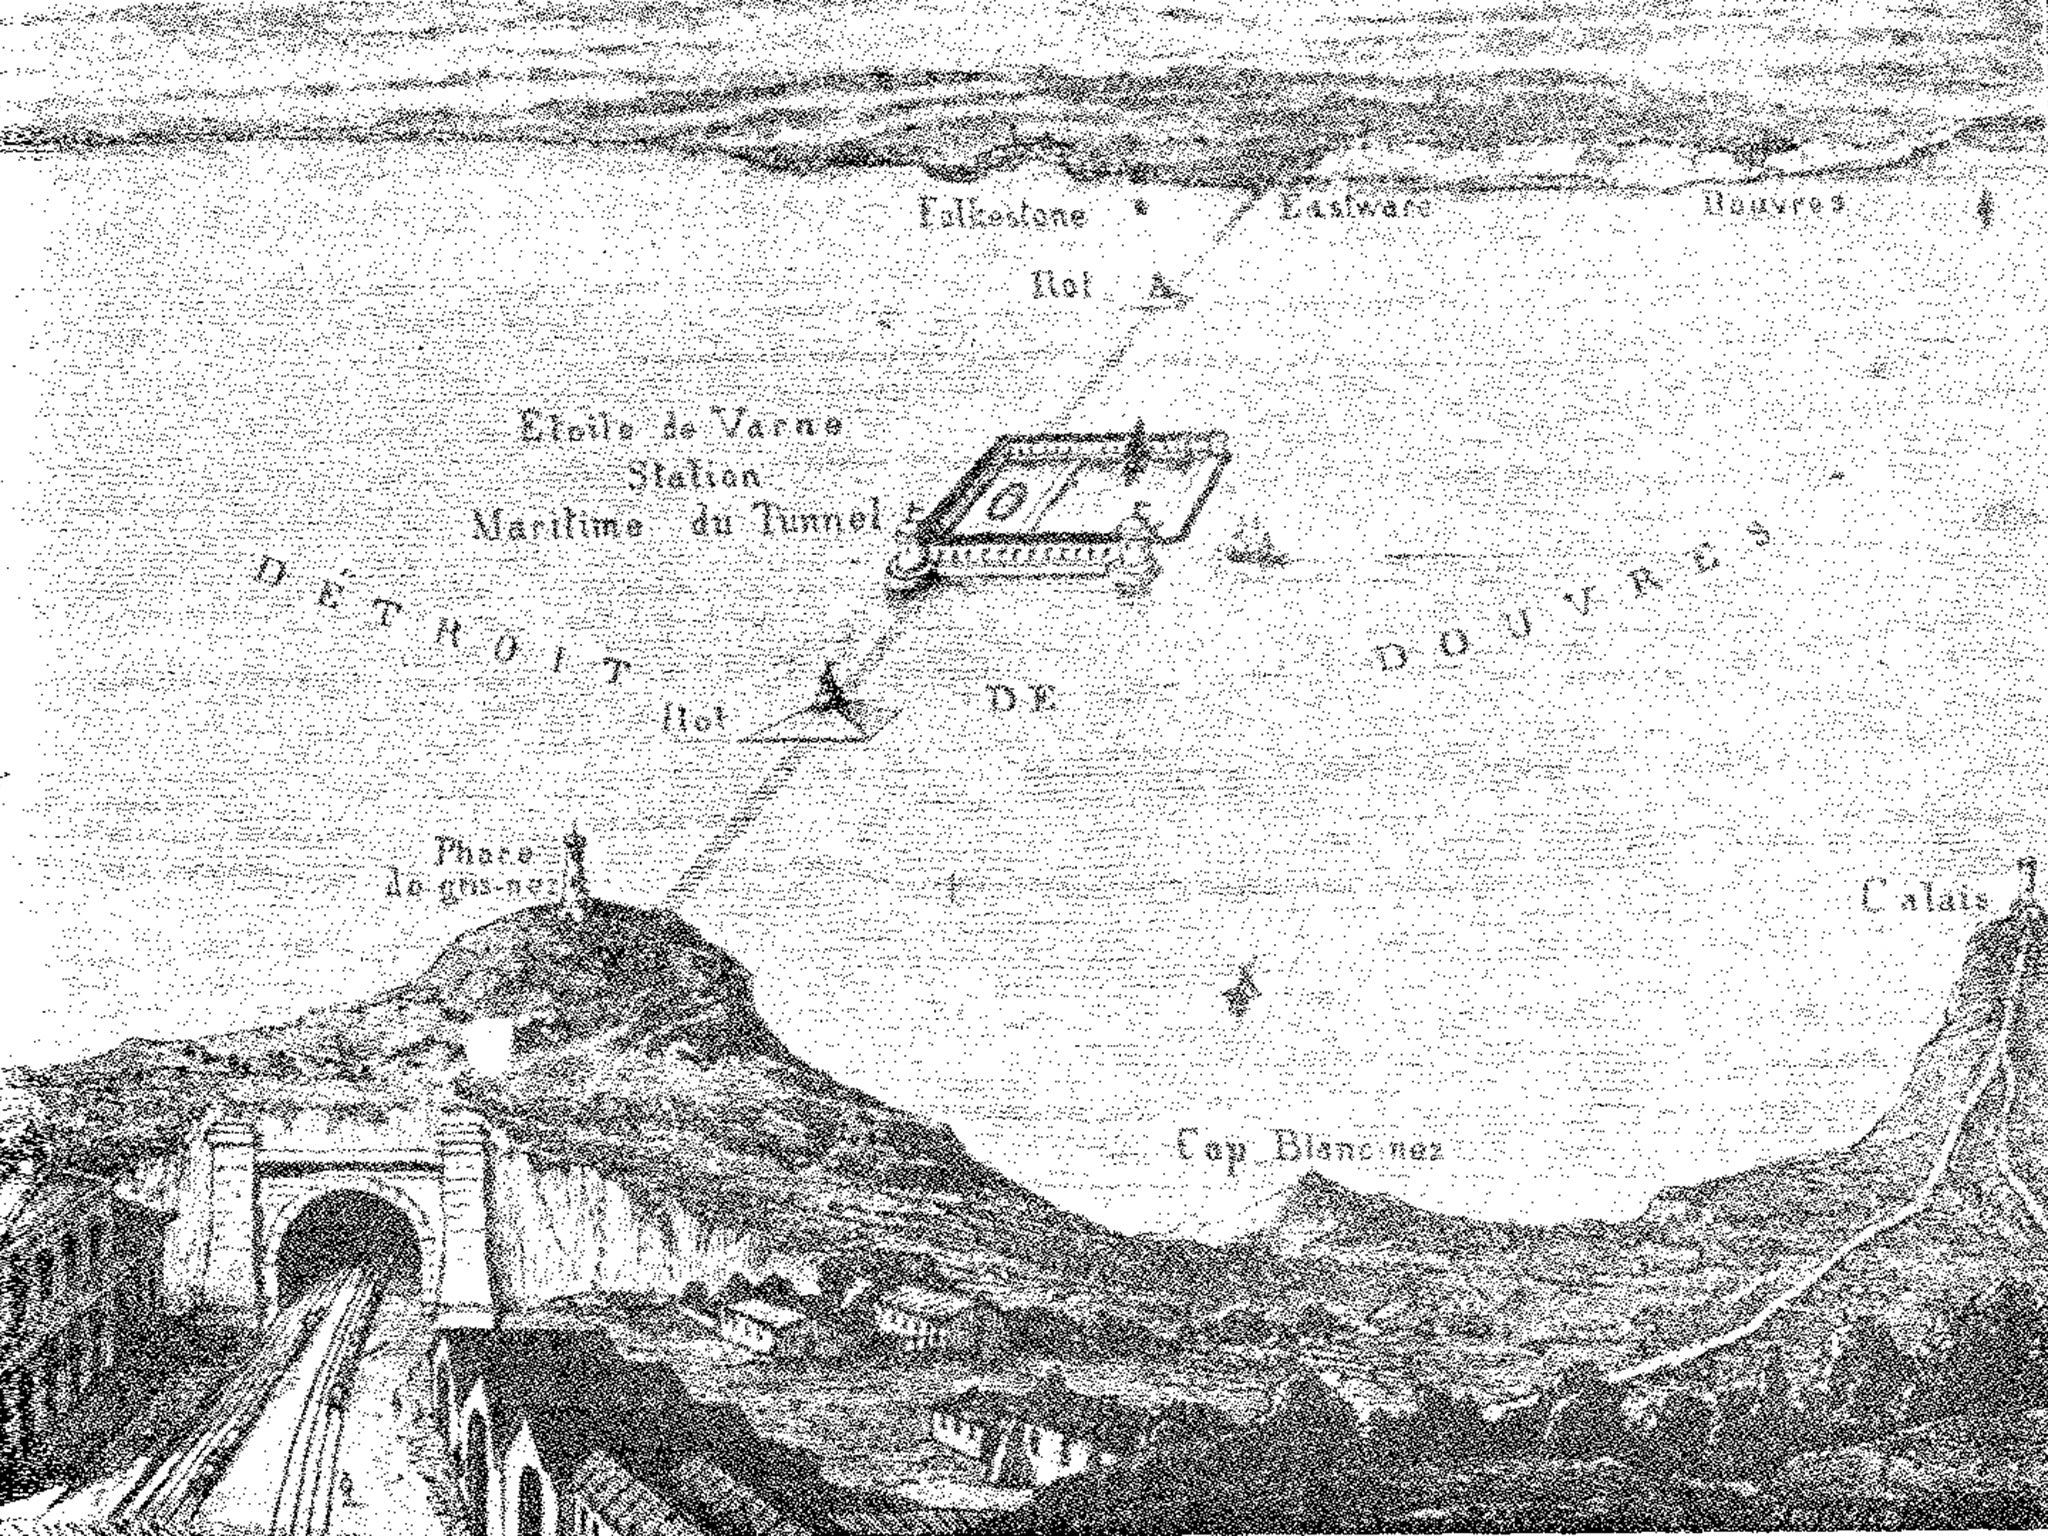 Thomé de Gamond's 1856 plan for a Channel tunnel, with a harbour mid-Channel on the Varne sandbank. The Frenchman presented seven design proposals, eventually persuading Queen Victoria, but not PM Lord Palmerston.